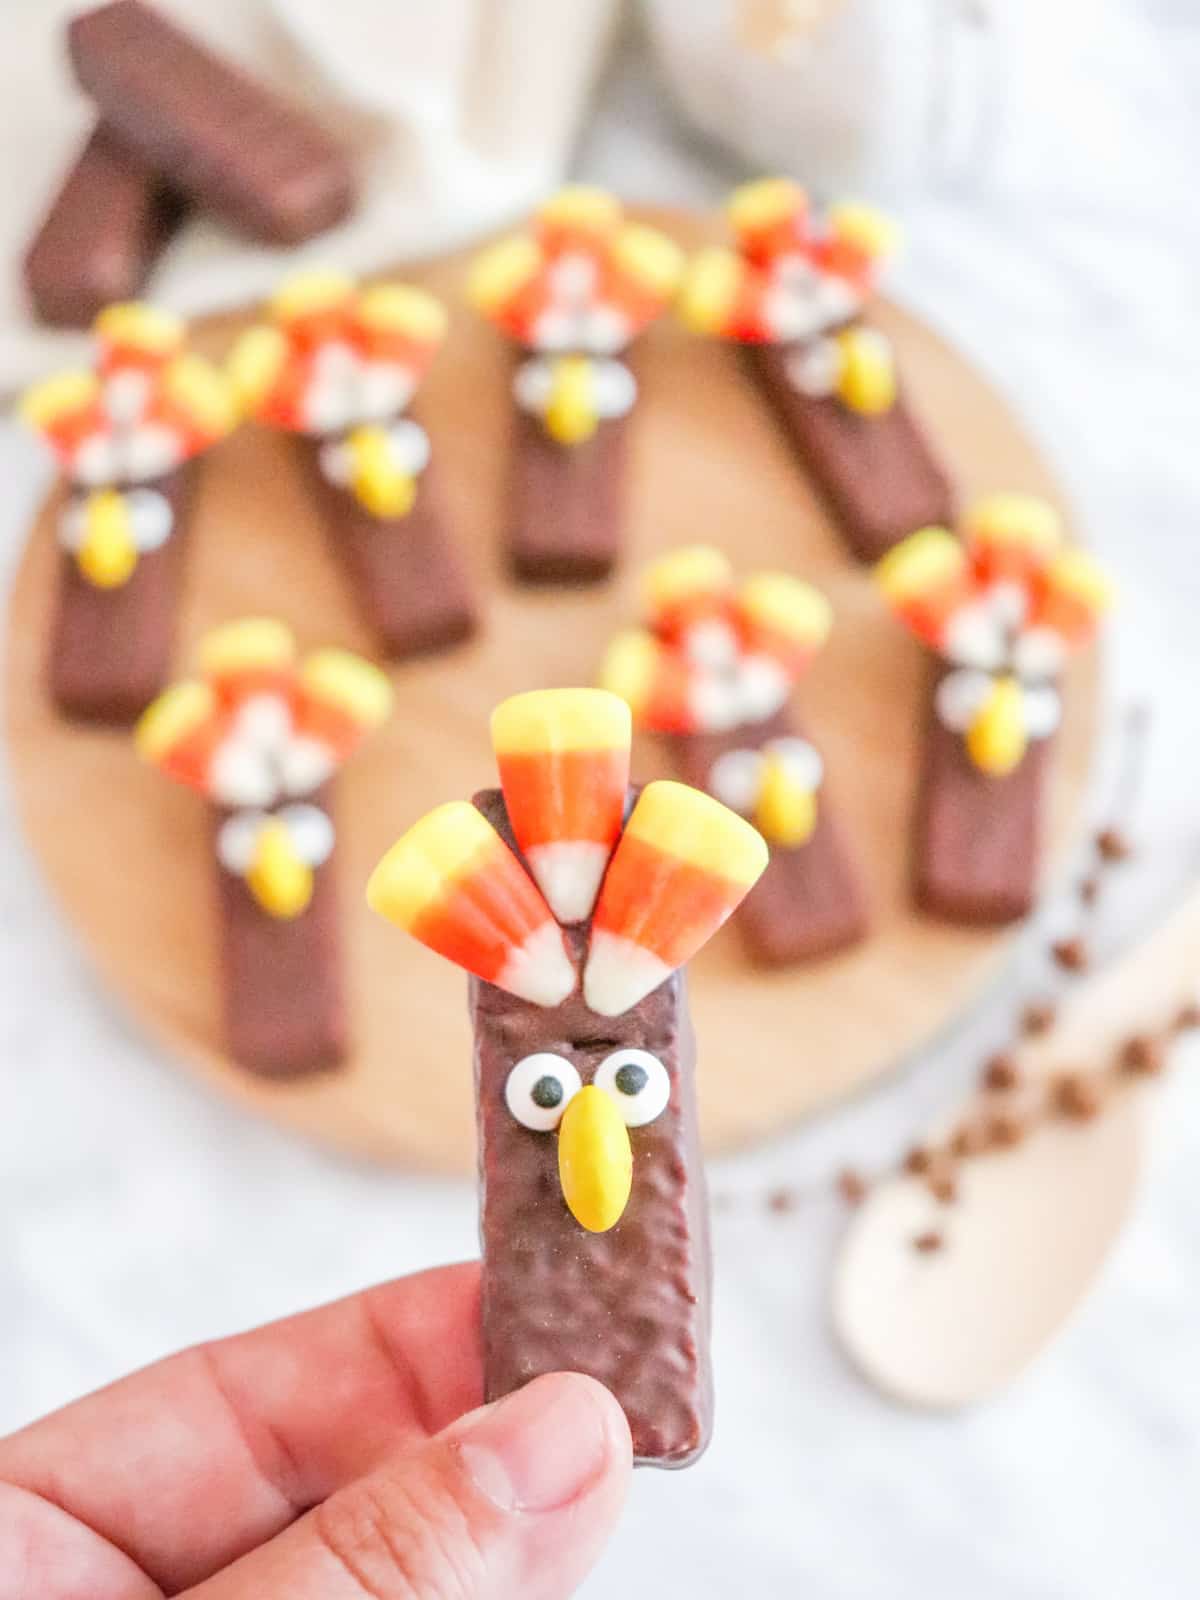 Hand holding a decorated Turkey Wafer Cookie